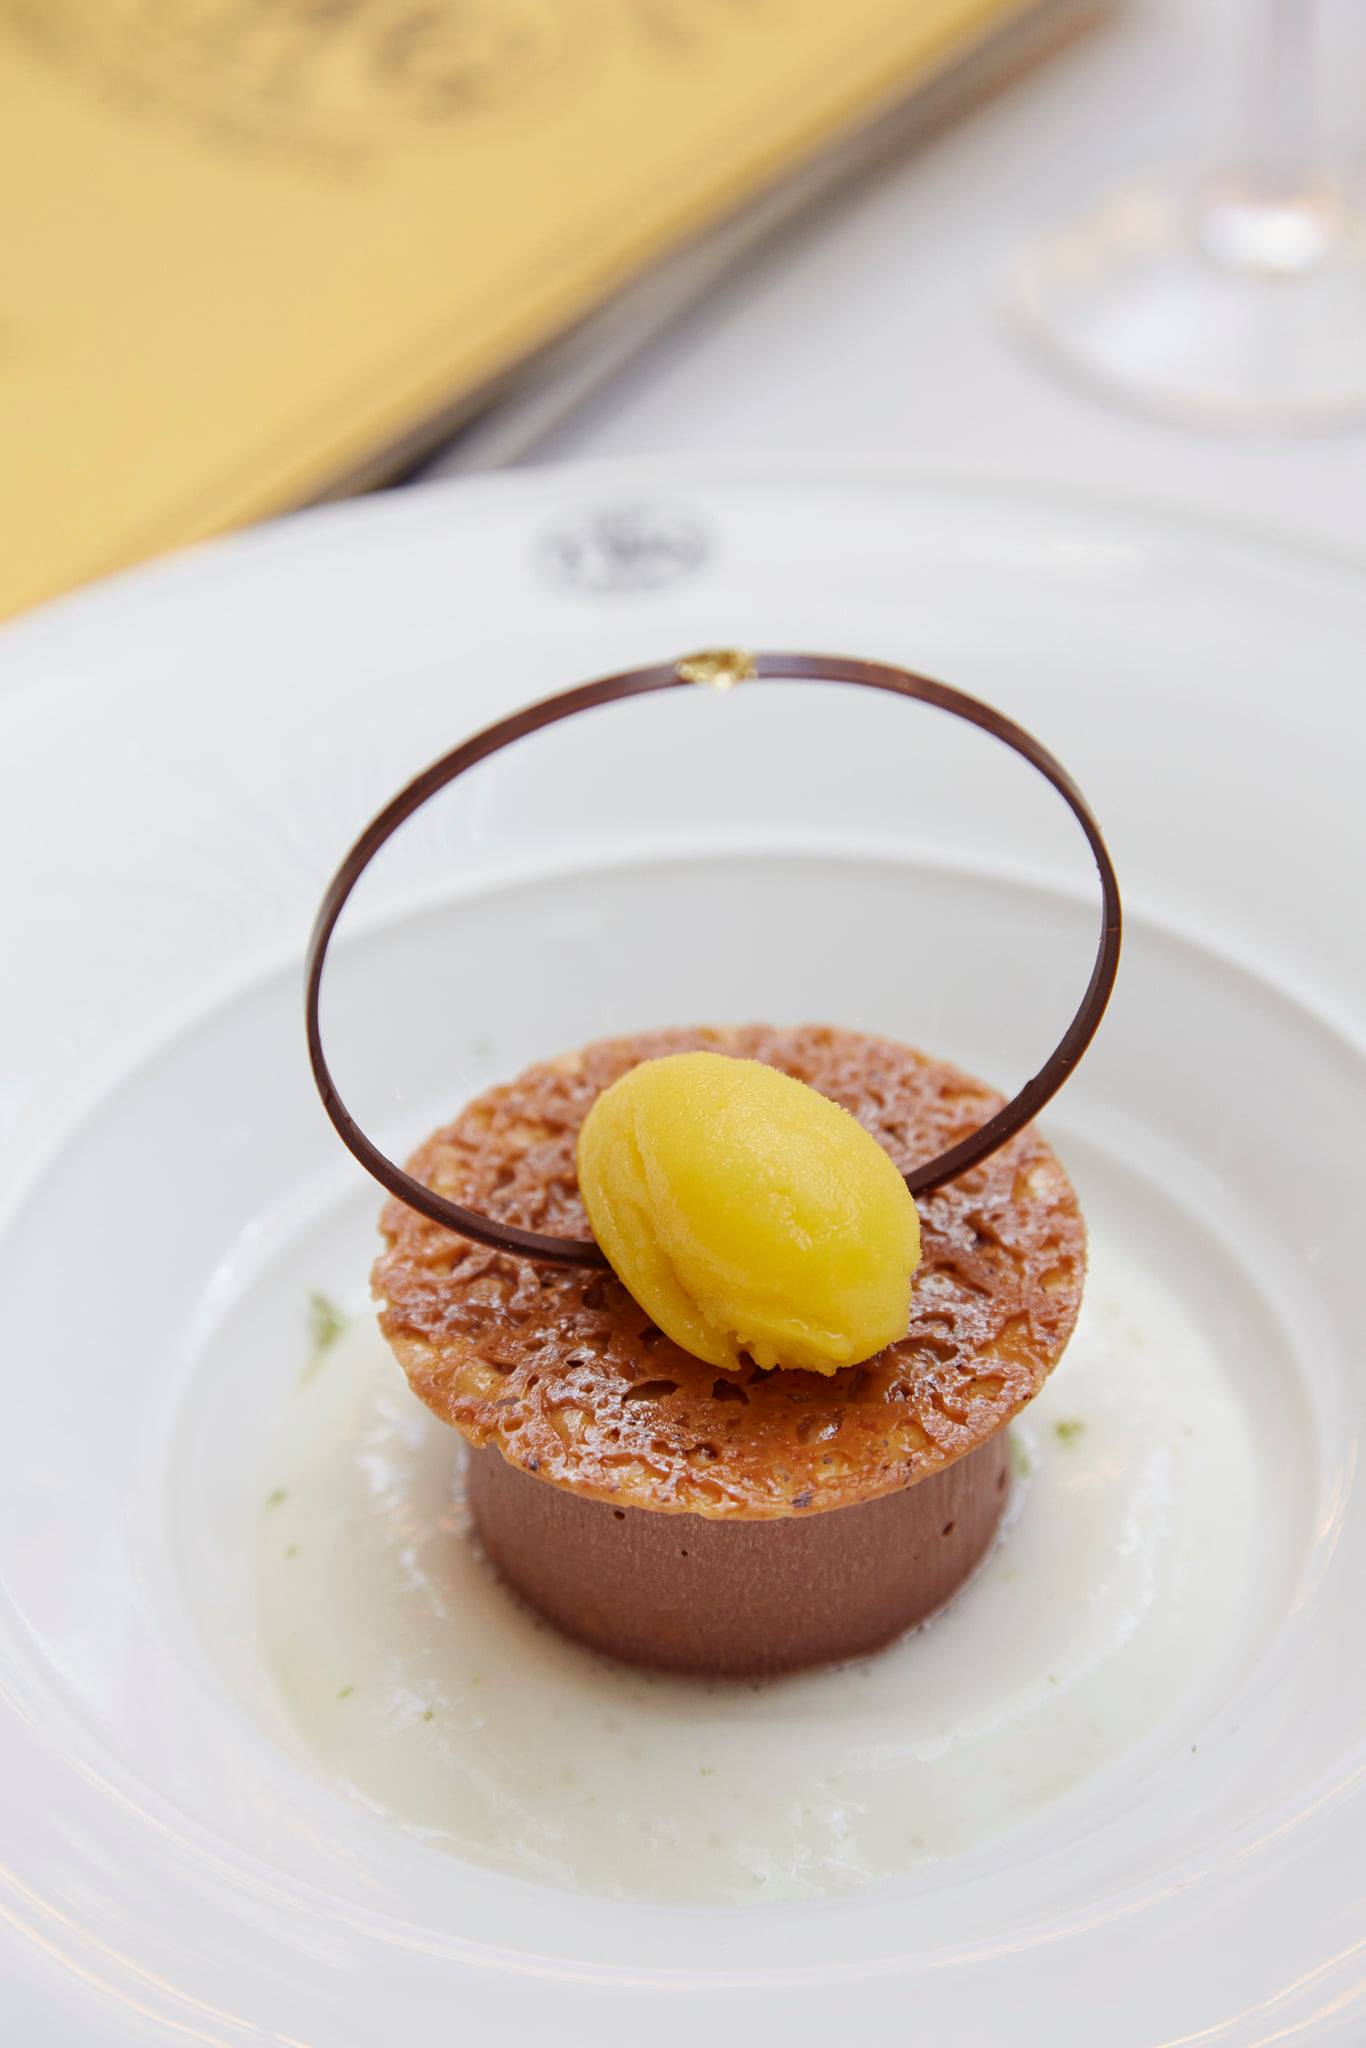 A great midweek treat, Earl Grey Fortune infused chocolate moussed topped with a hazelnut tuile and a scoop of mandarin sorbet, served with yuzu foam. Available this week at any TWG Tea Salons in Singapore.